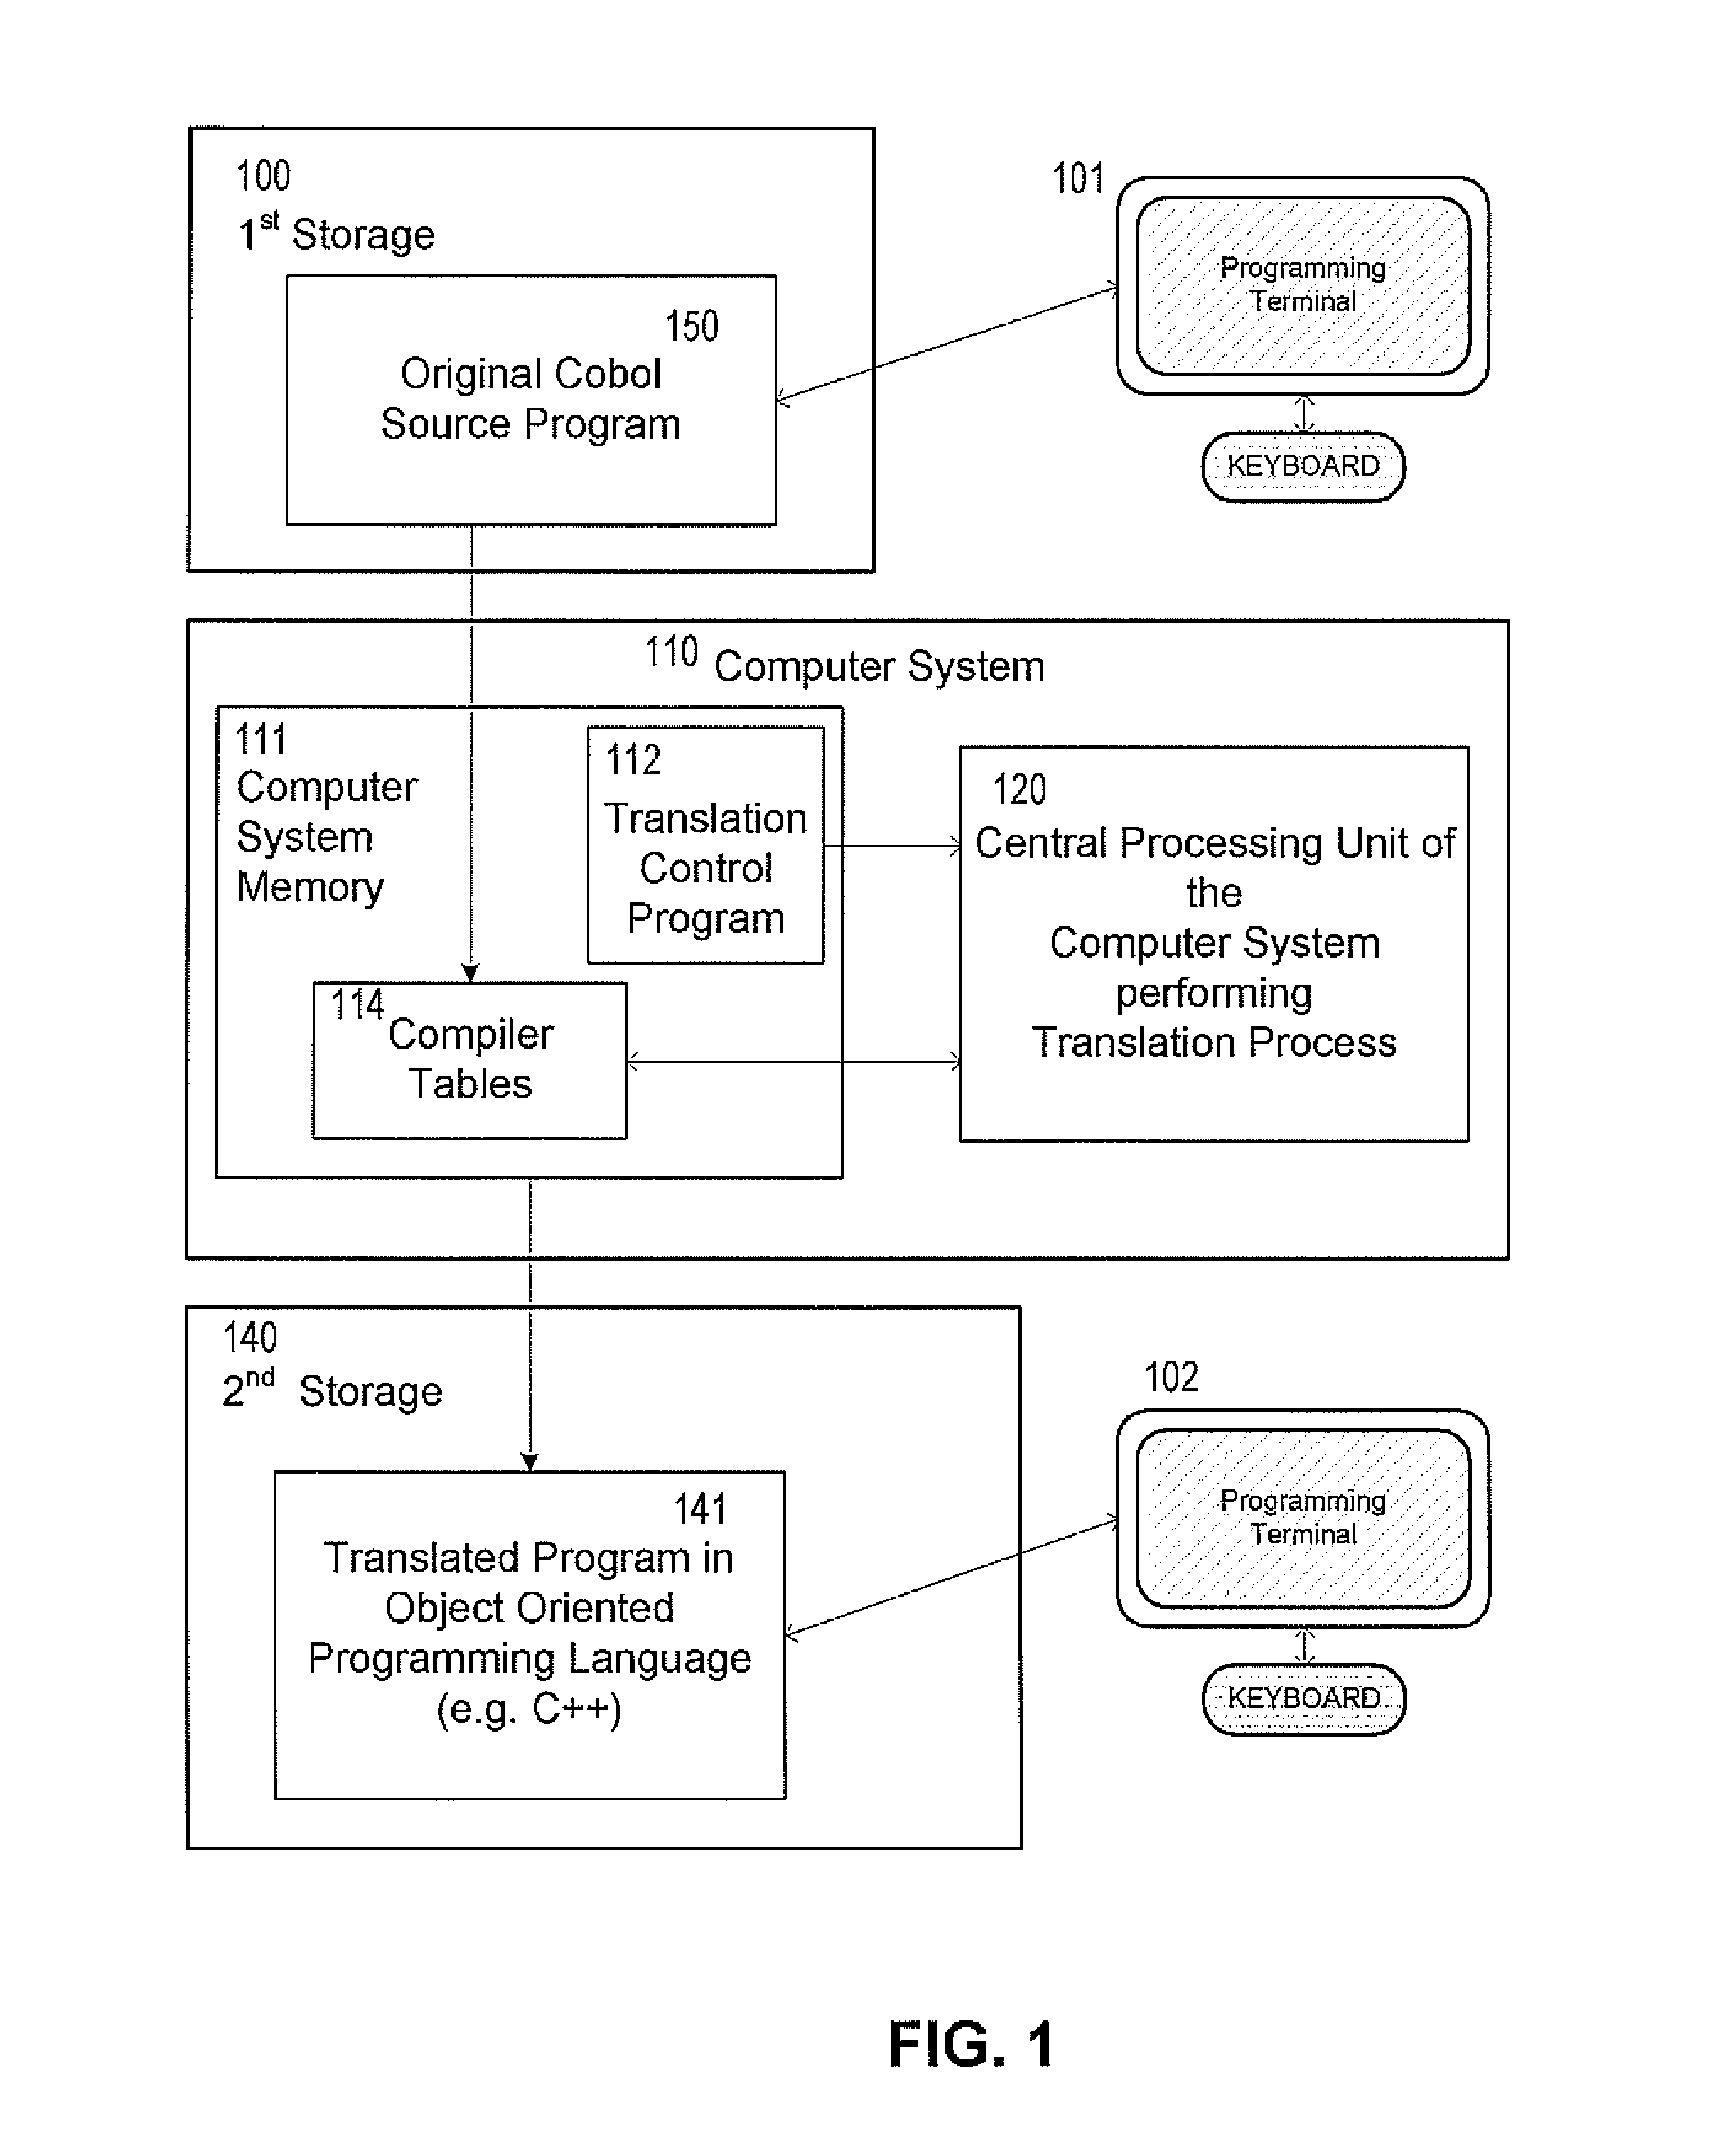 Method for translating a cobol source program into readable and maintainable program code in an object oriented second programming language